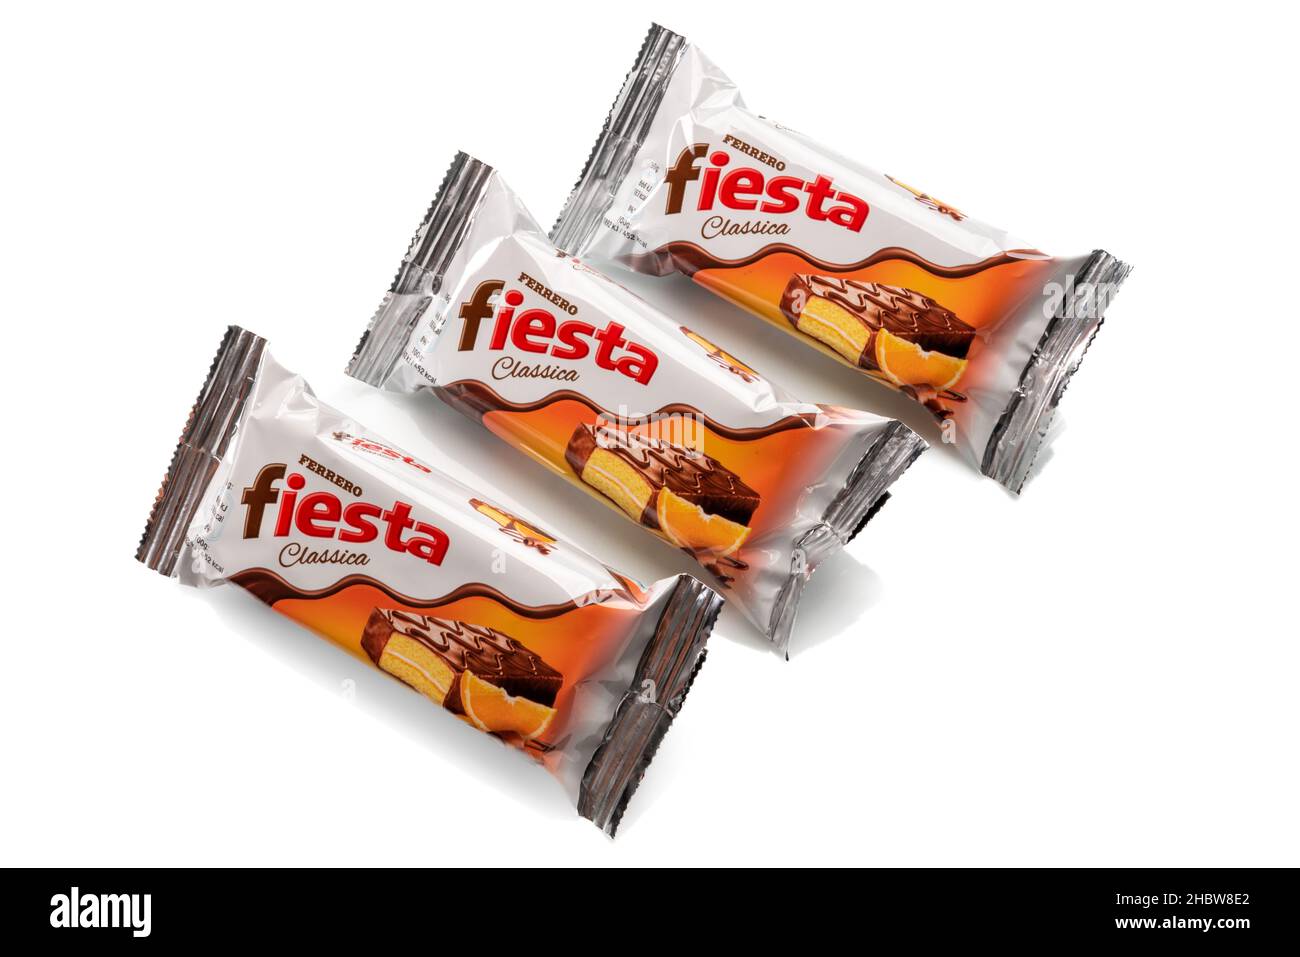 Alba, Italy - December 21, 2021: Fiesta Ferrero chocolate snack for children. Three packs isolated on white. Ferrero is world famous confectionery fac Stock Photo